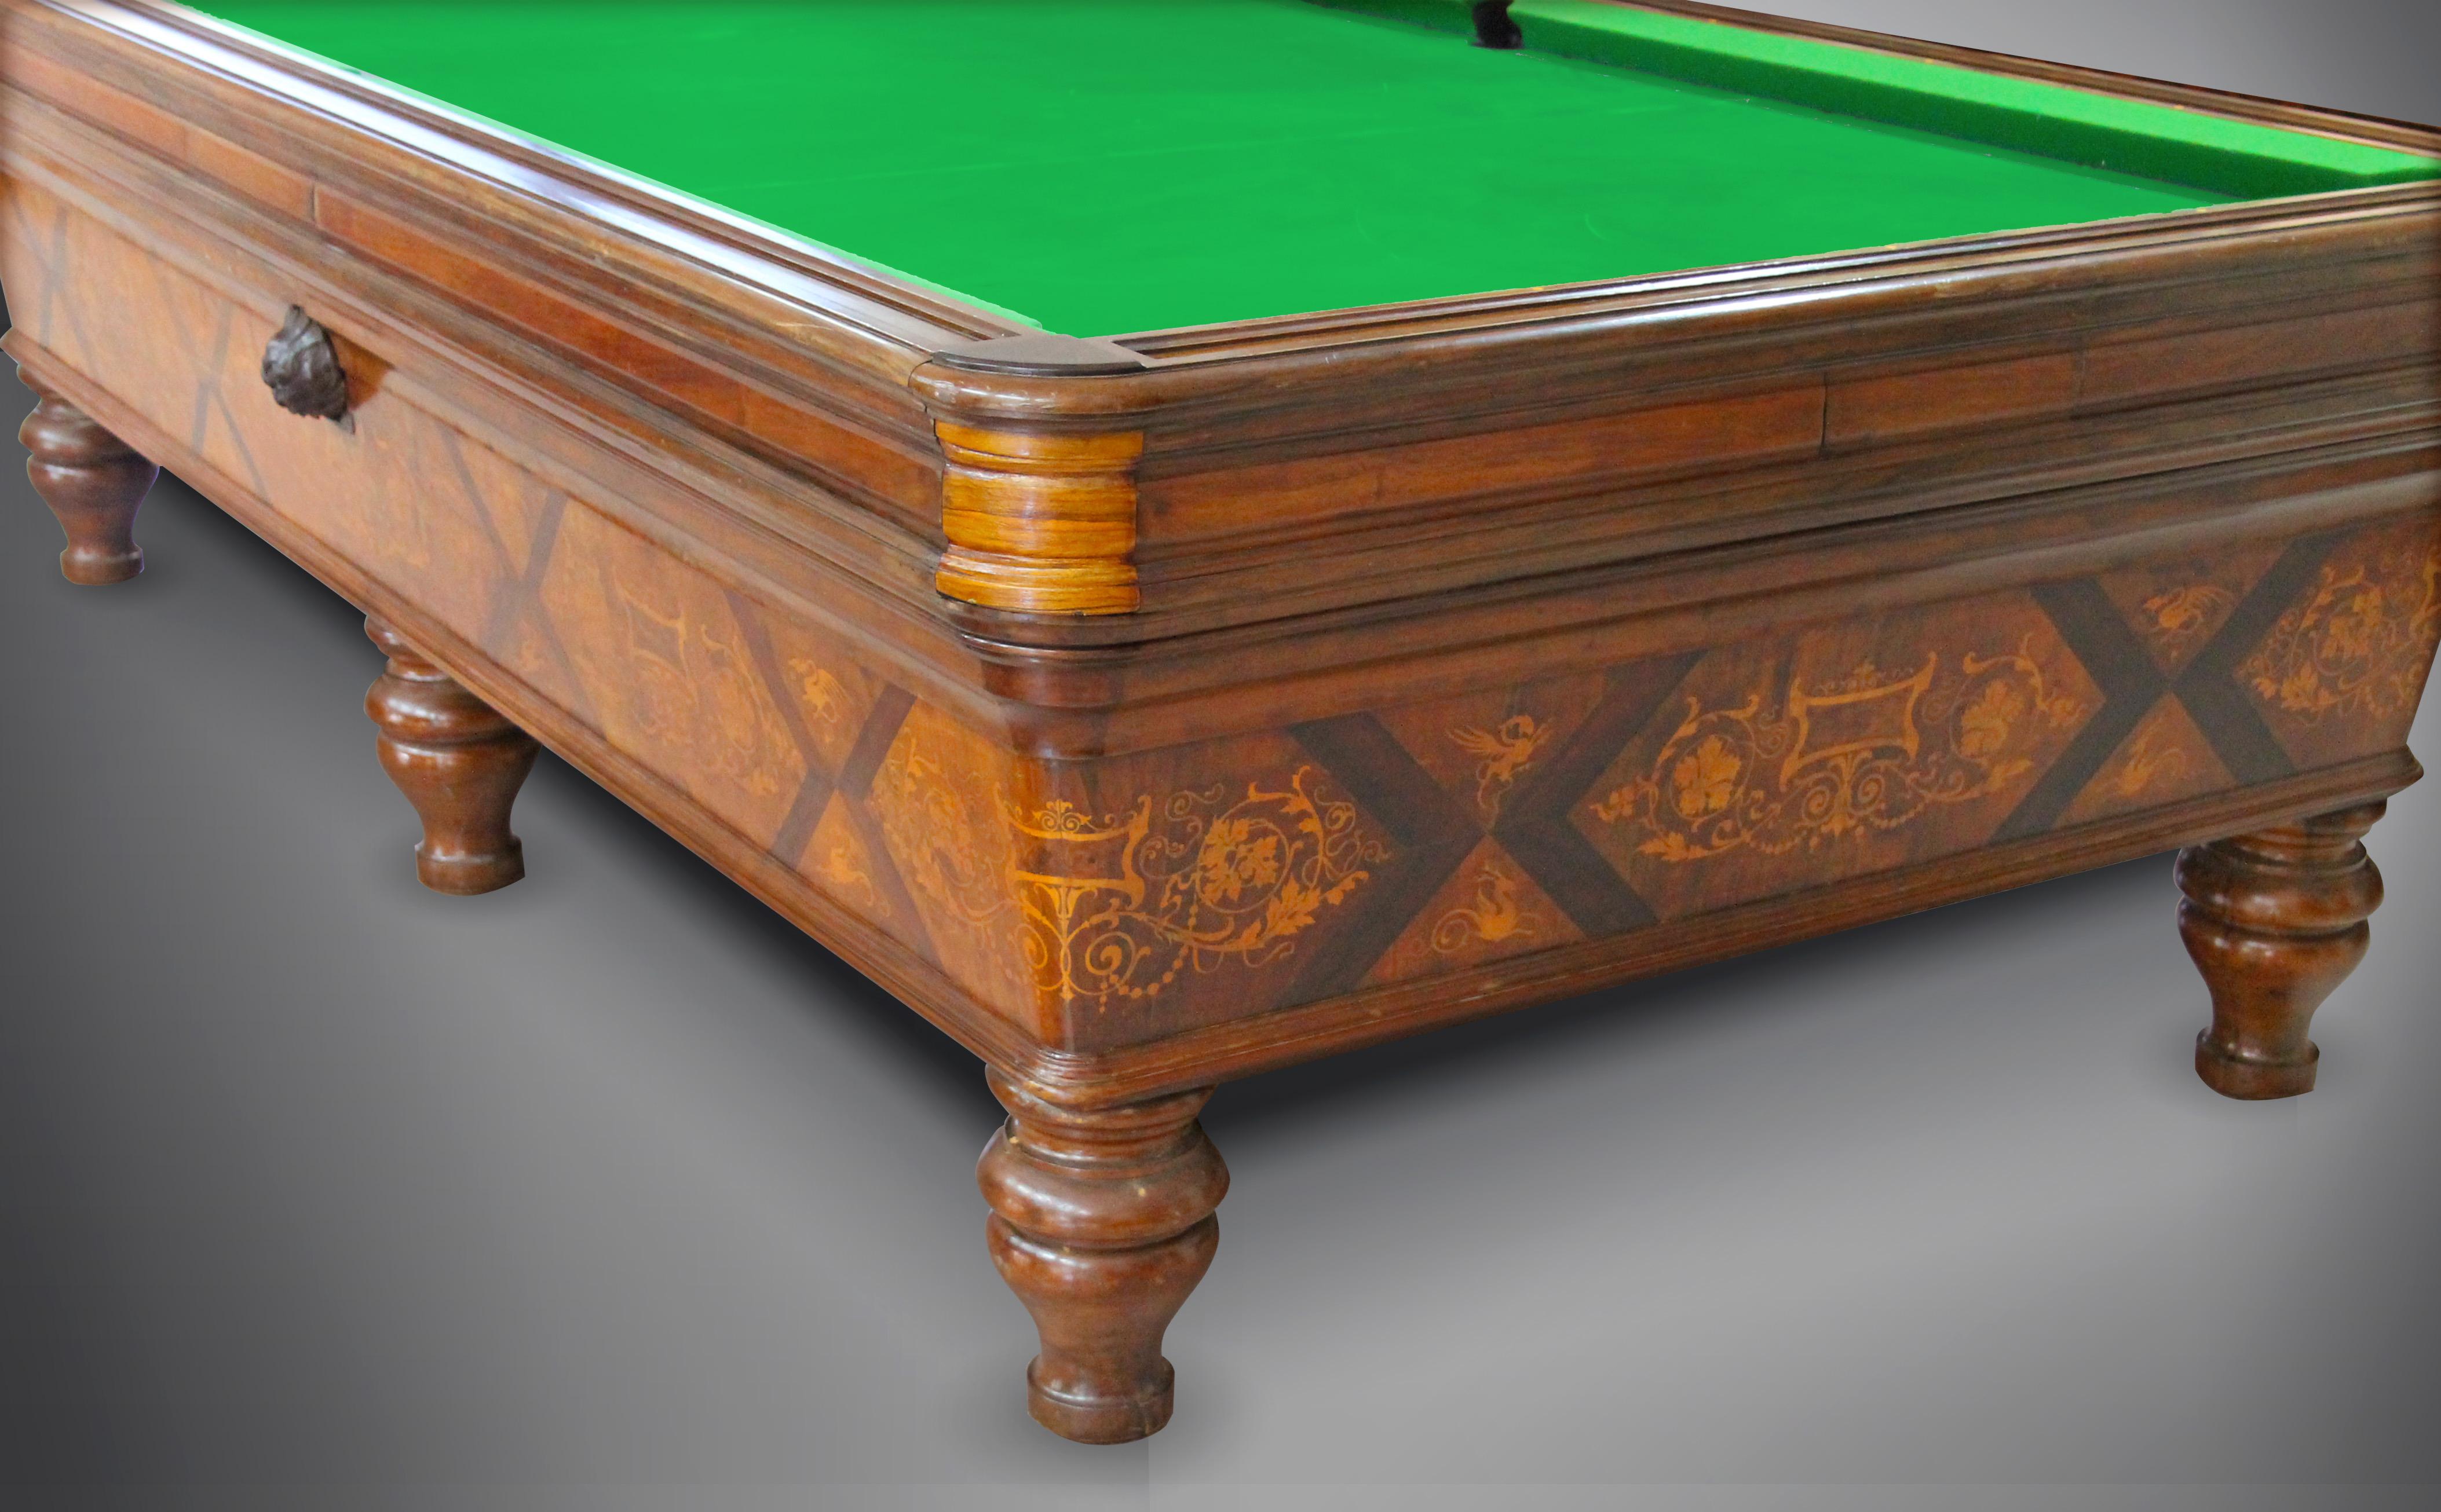 Piece dating back to 1800, with inlays throughout the billiard table with floral motifs. Rosewood, ebony, burl of precious woods, make this piece unique in the world also because it belonged to the Vate Gabriele D'Annunzio (1863\1938)



Note